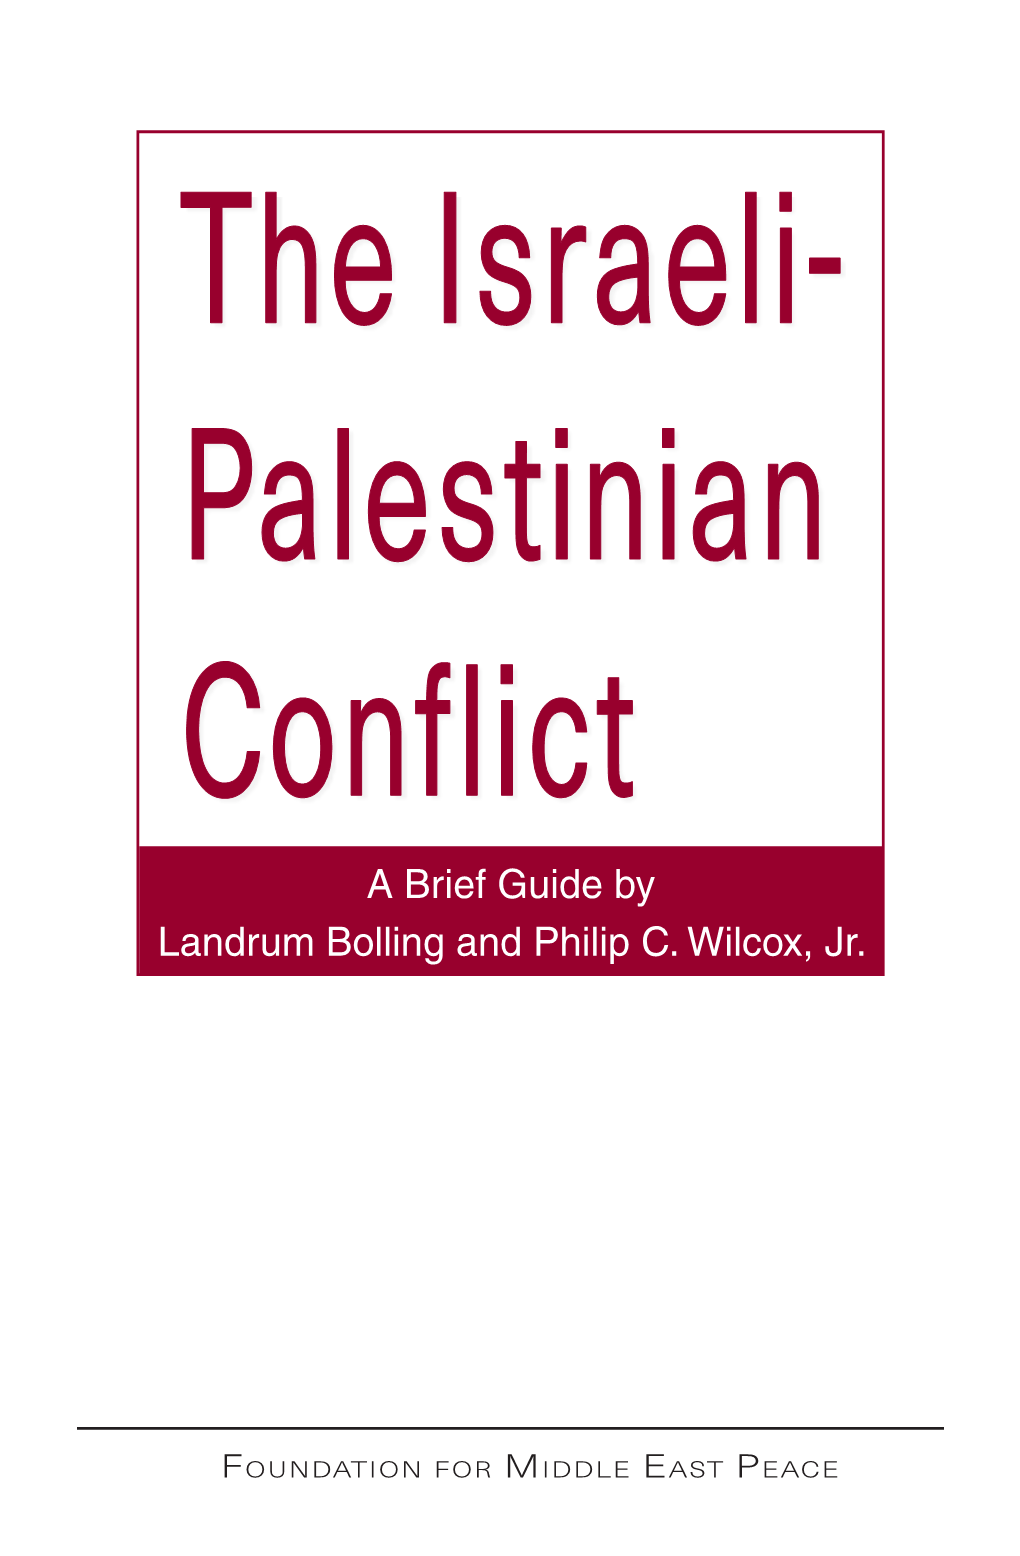 The Israeli- Palestinian Conflict